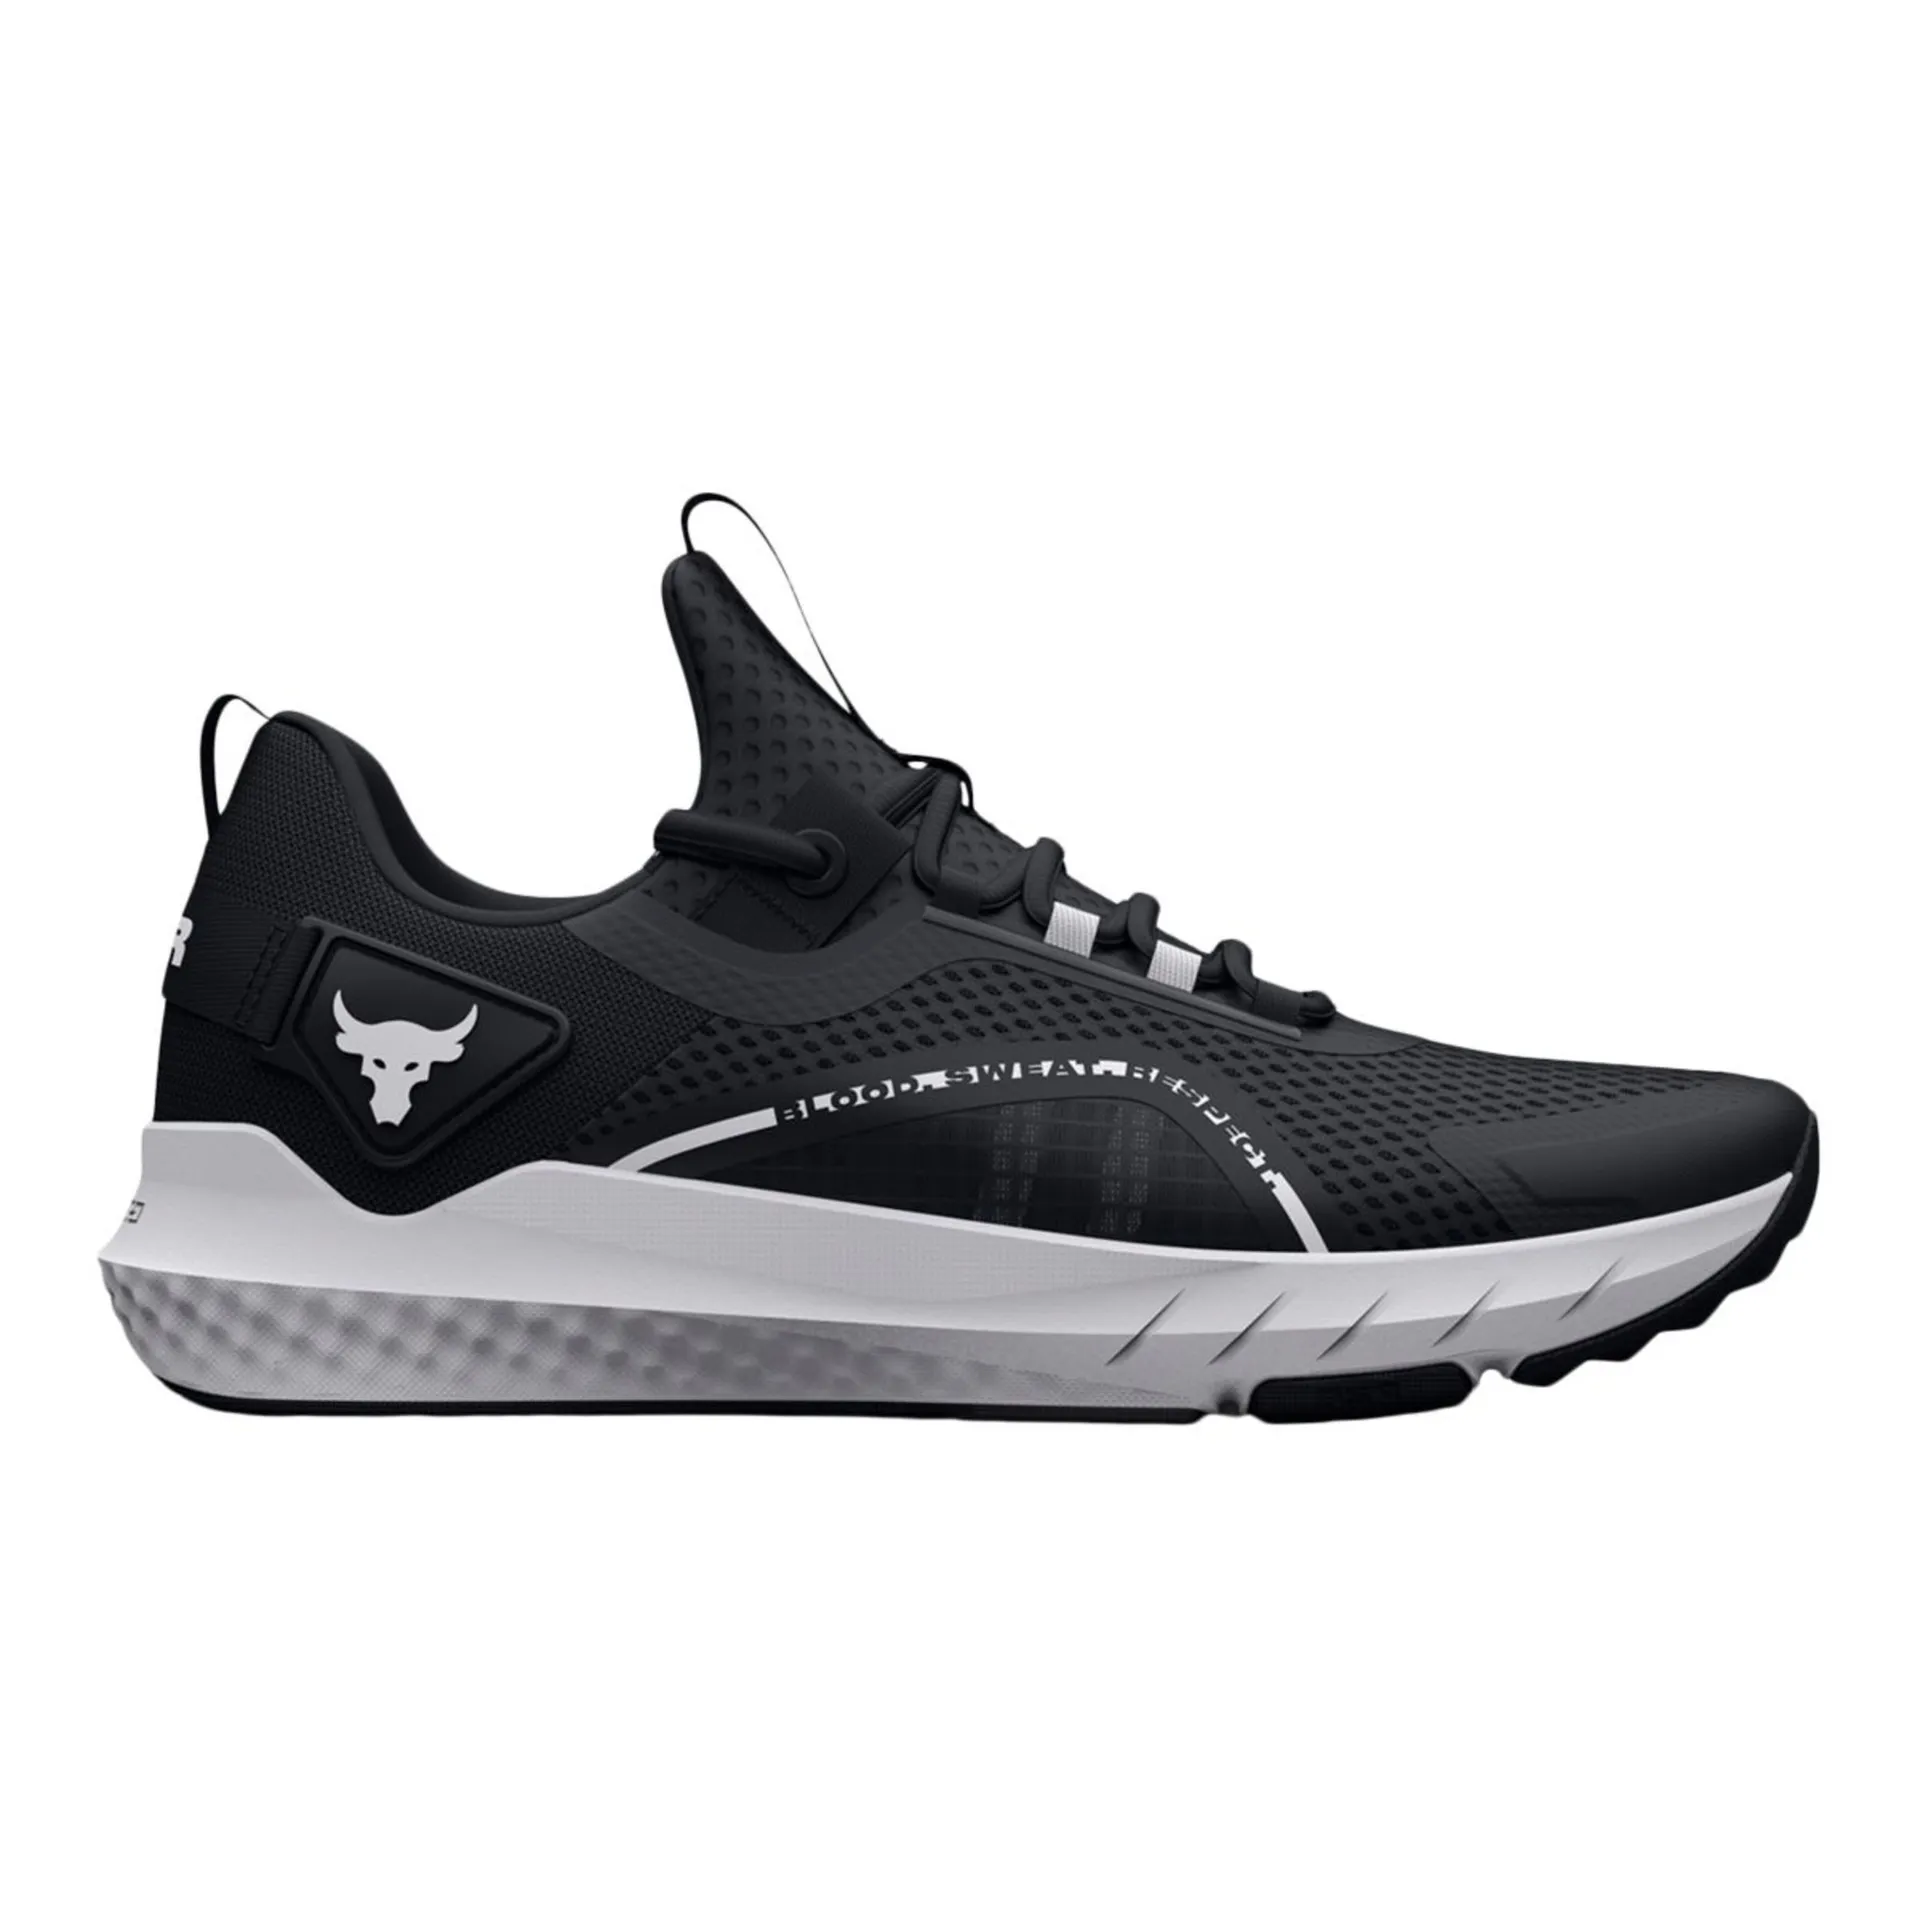 Under Armour Women's Project Rock BSR 3 Training Shoes